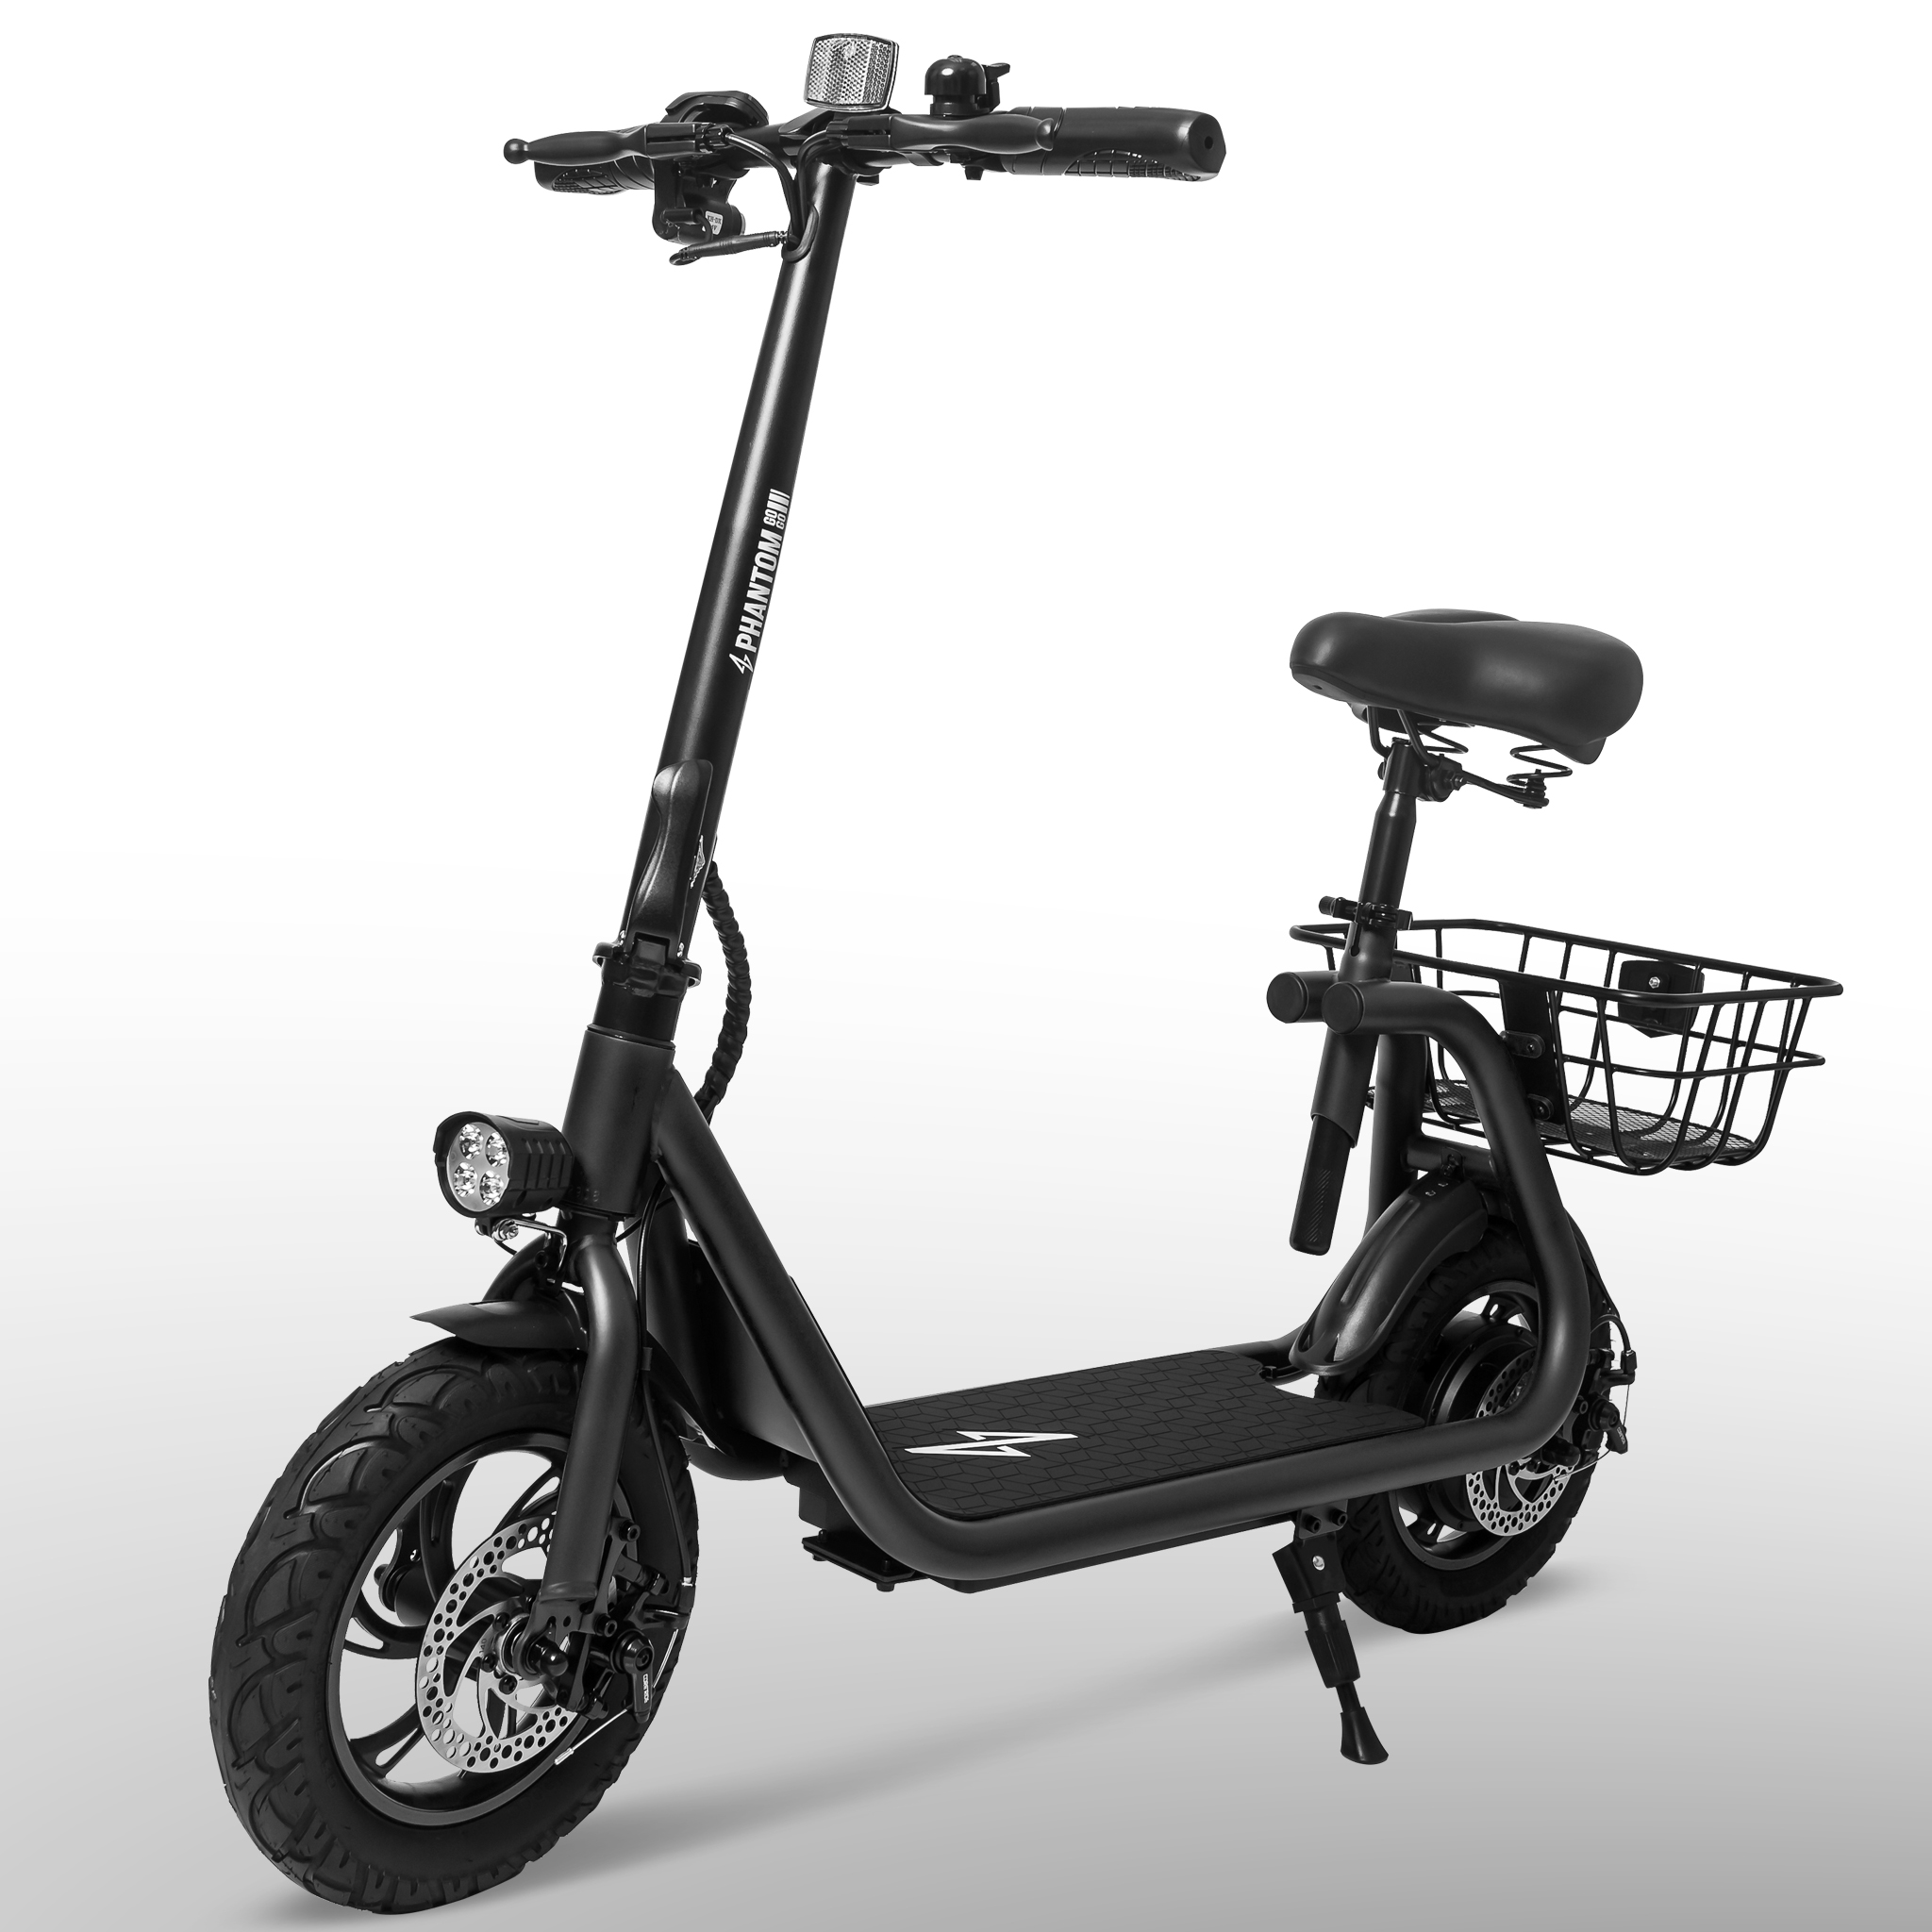 

Phantomgogo R1 Electric Scooter For Adults Foldable Scooter With Seat & Carry Basket With 450-watt Motor 15mph 265lbs Max Load